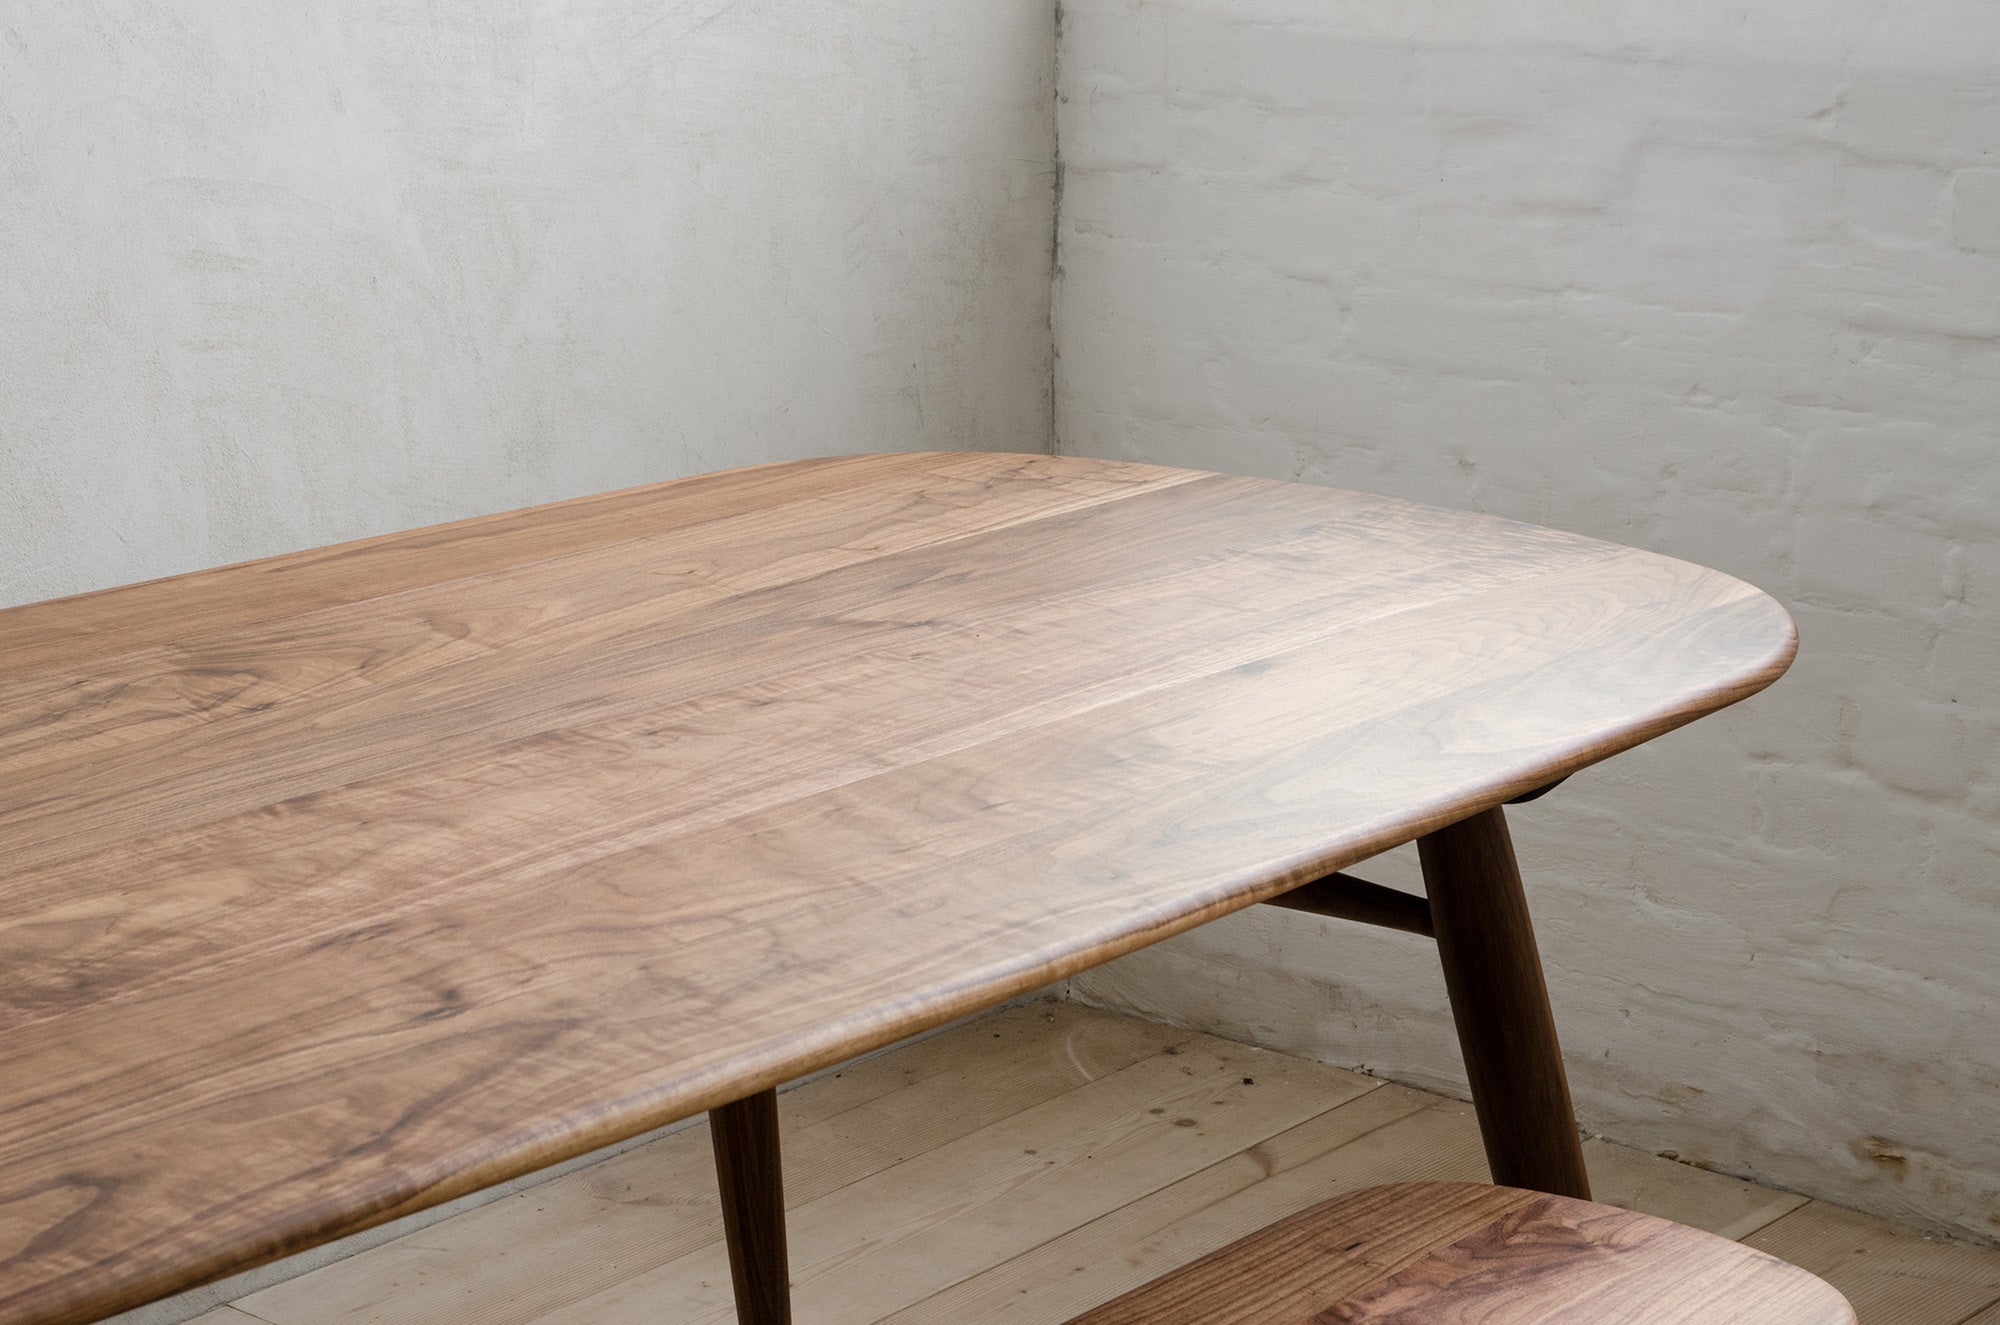 Top of Nomad Rectangular Dining Table